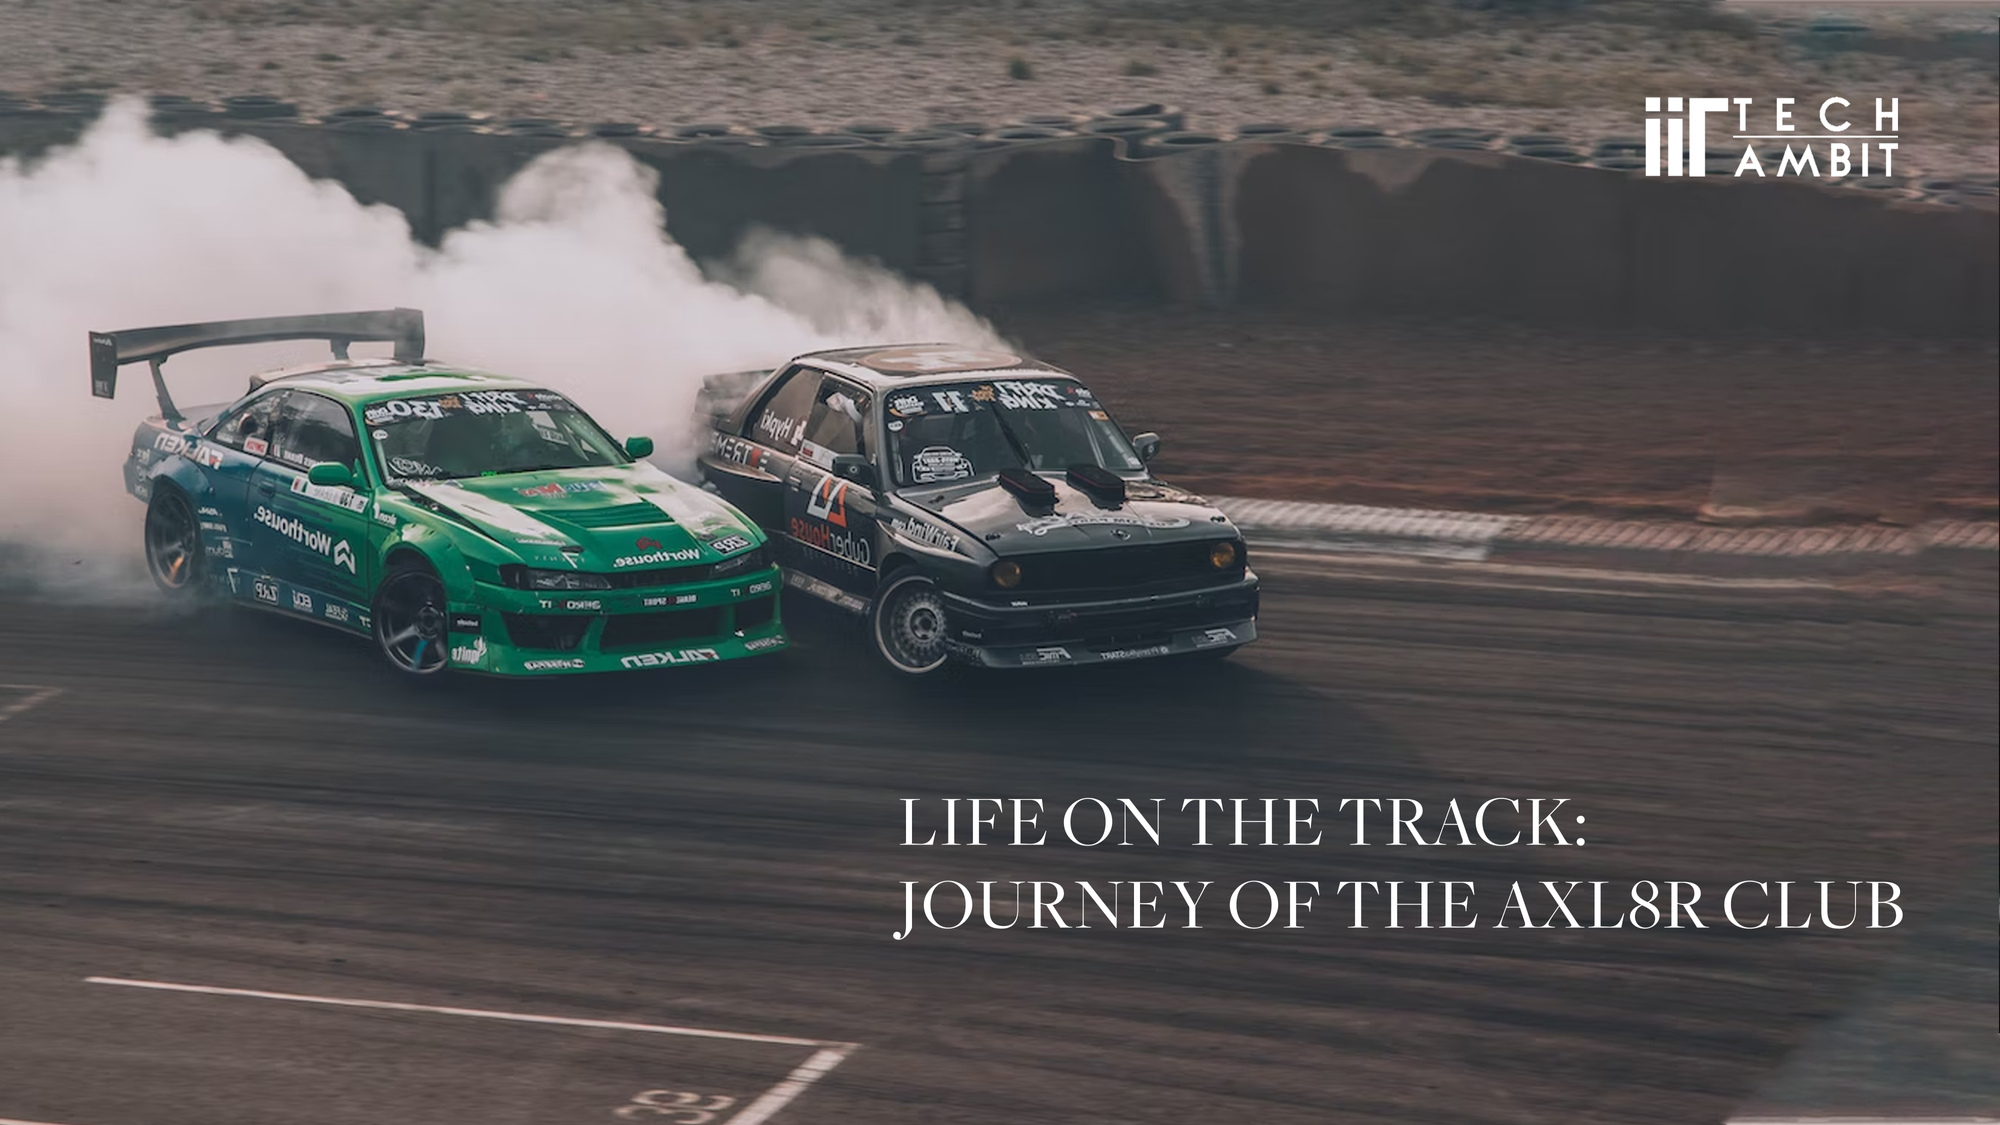 Life on the Track: Journey of the Axl8r Club